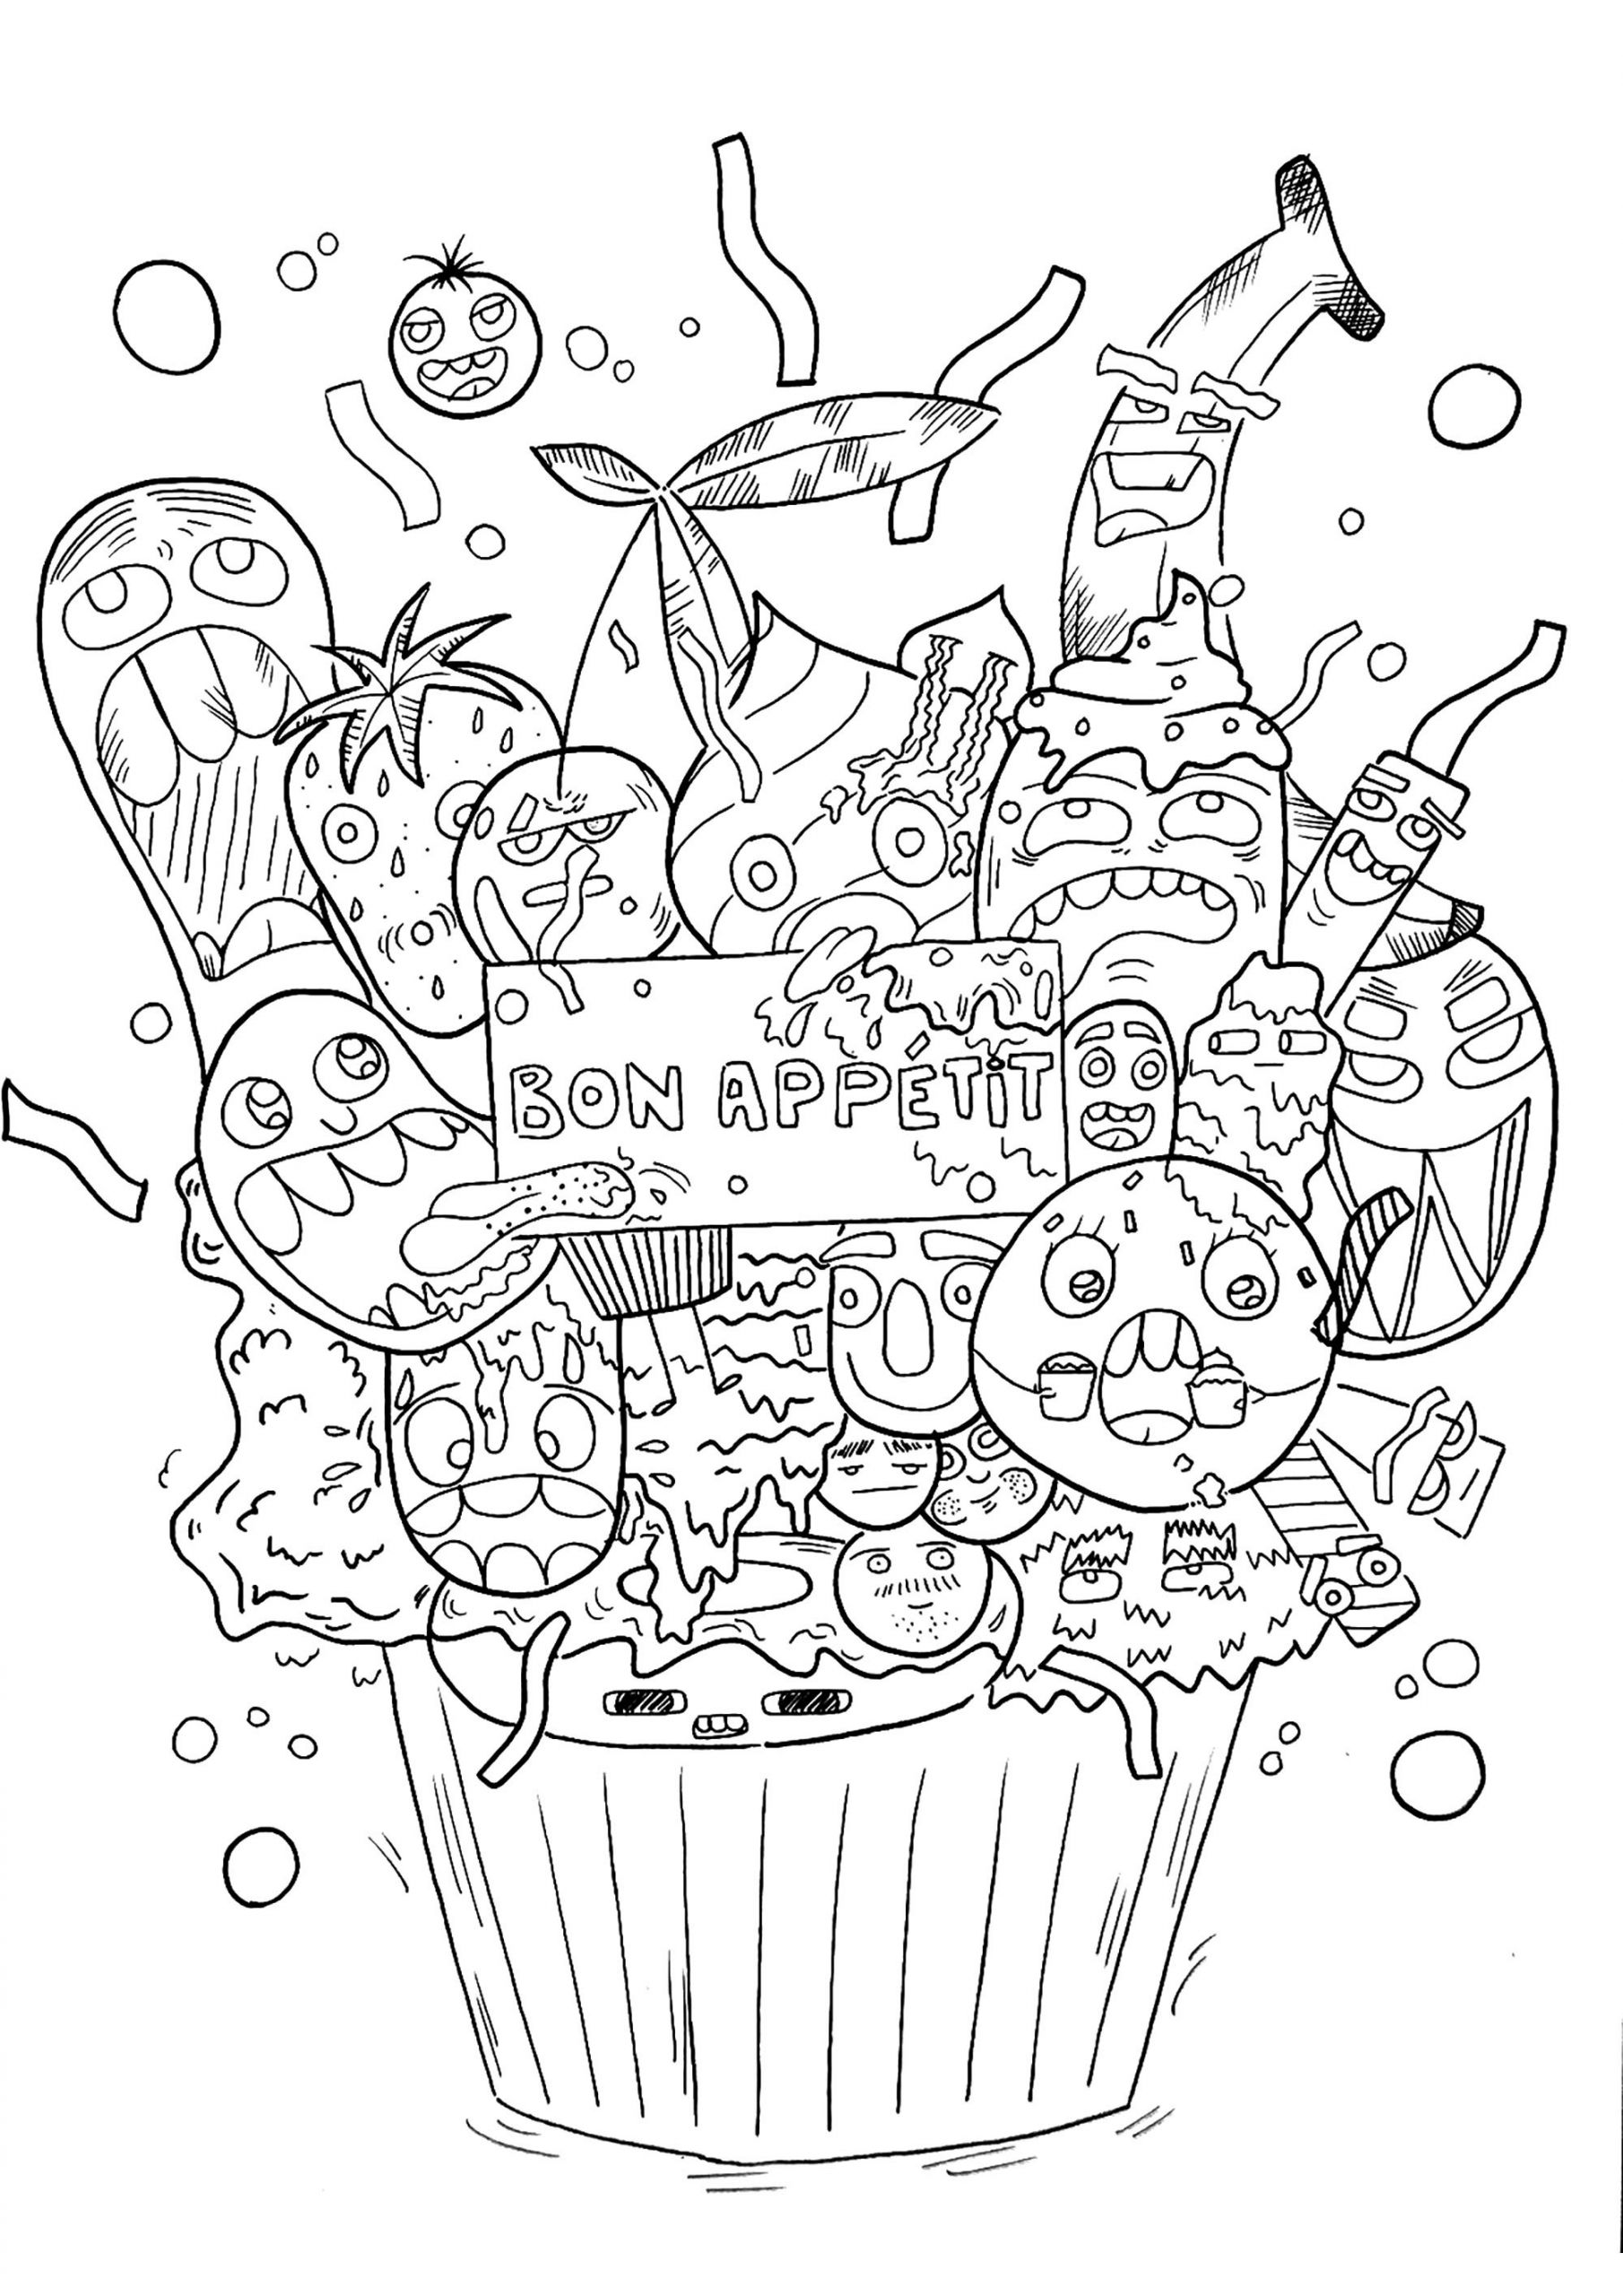 Coloring Art For Kids
 Doodle art to print Doodle Art Kids Coloring Pages